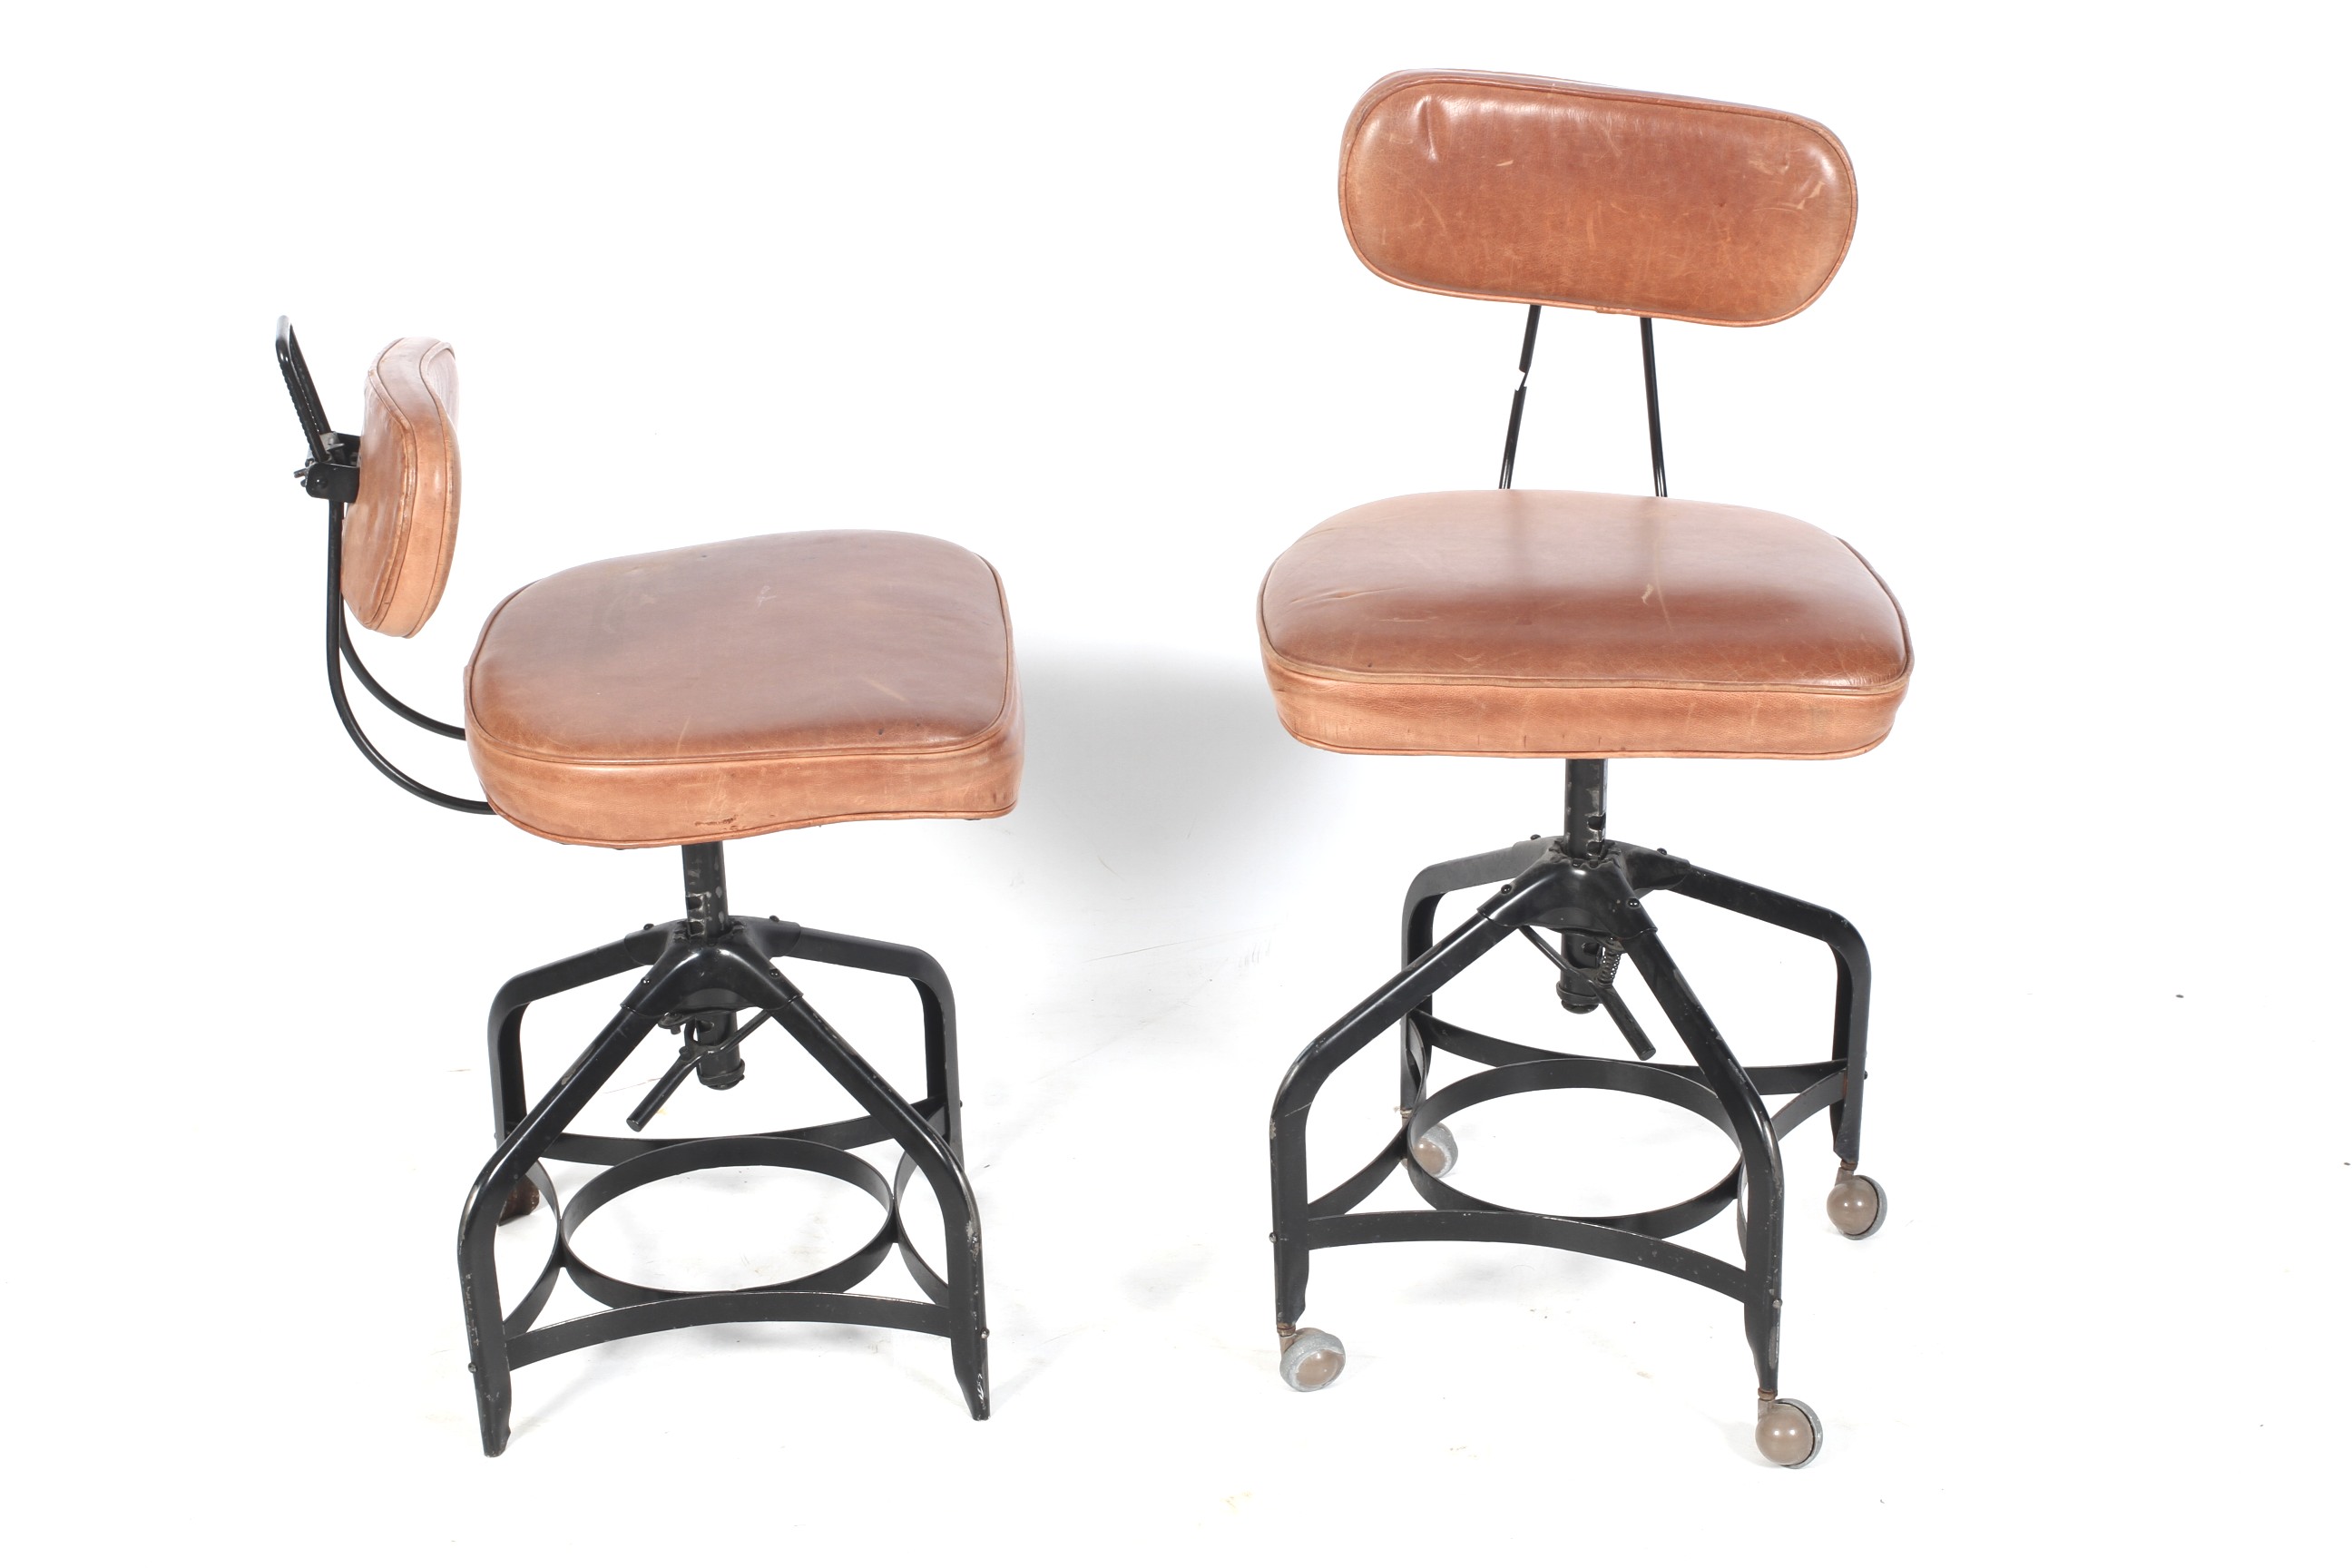 Two industrial style adjustable leather and metal office chairs. - Image 2 of 2